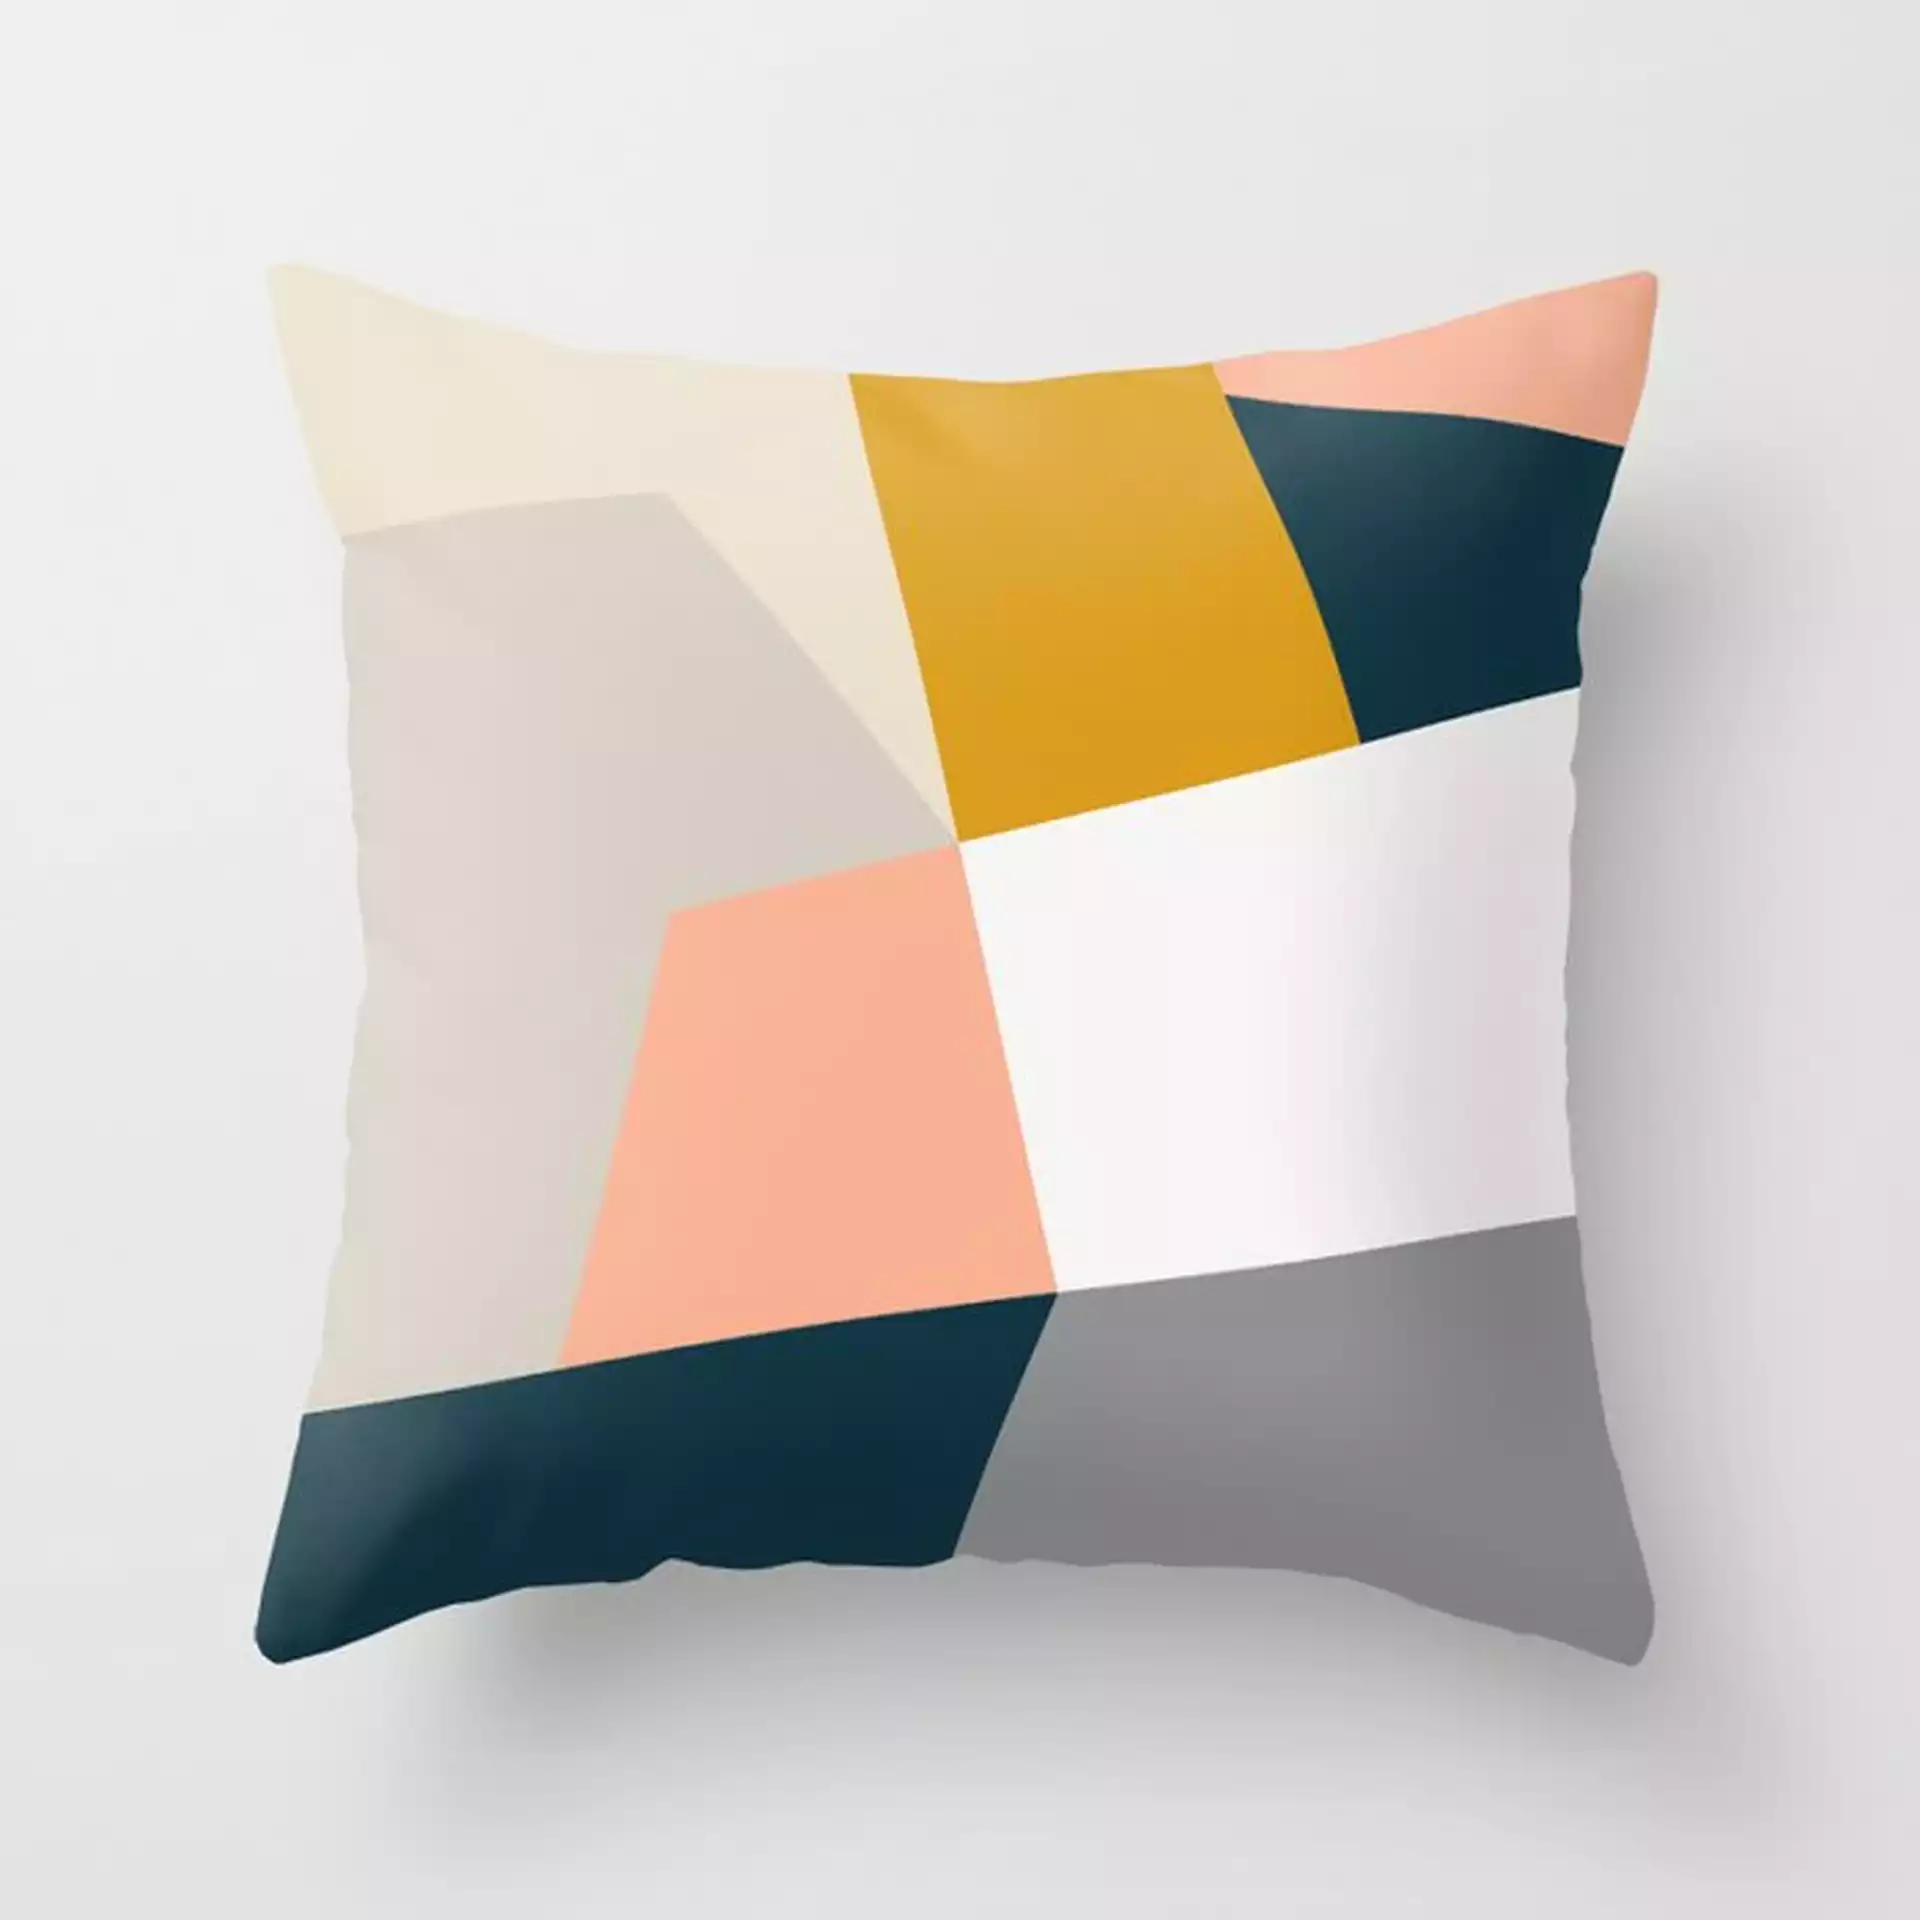 Abstract Geometric 27 Navy Couch Throw Pillow by The Old Art Studio - Cover (16" x 16") with pillow insert - Indoor Pillow